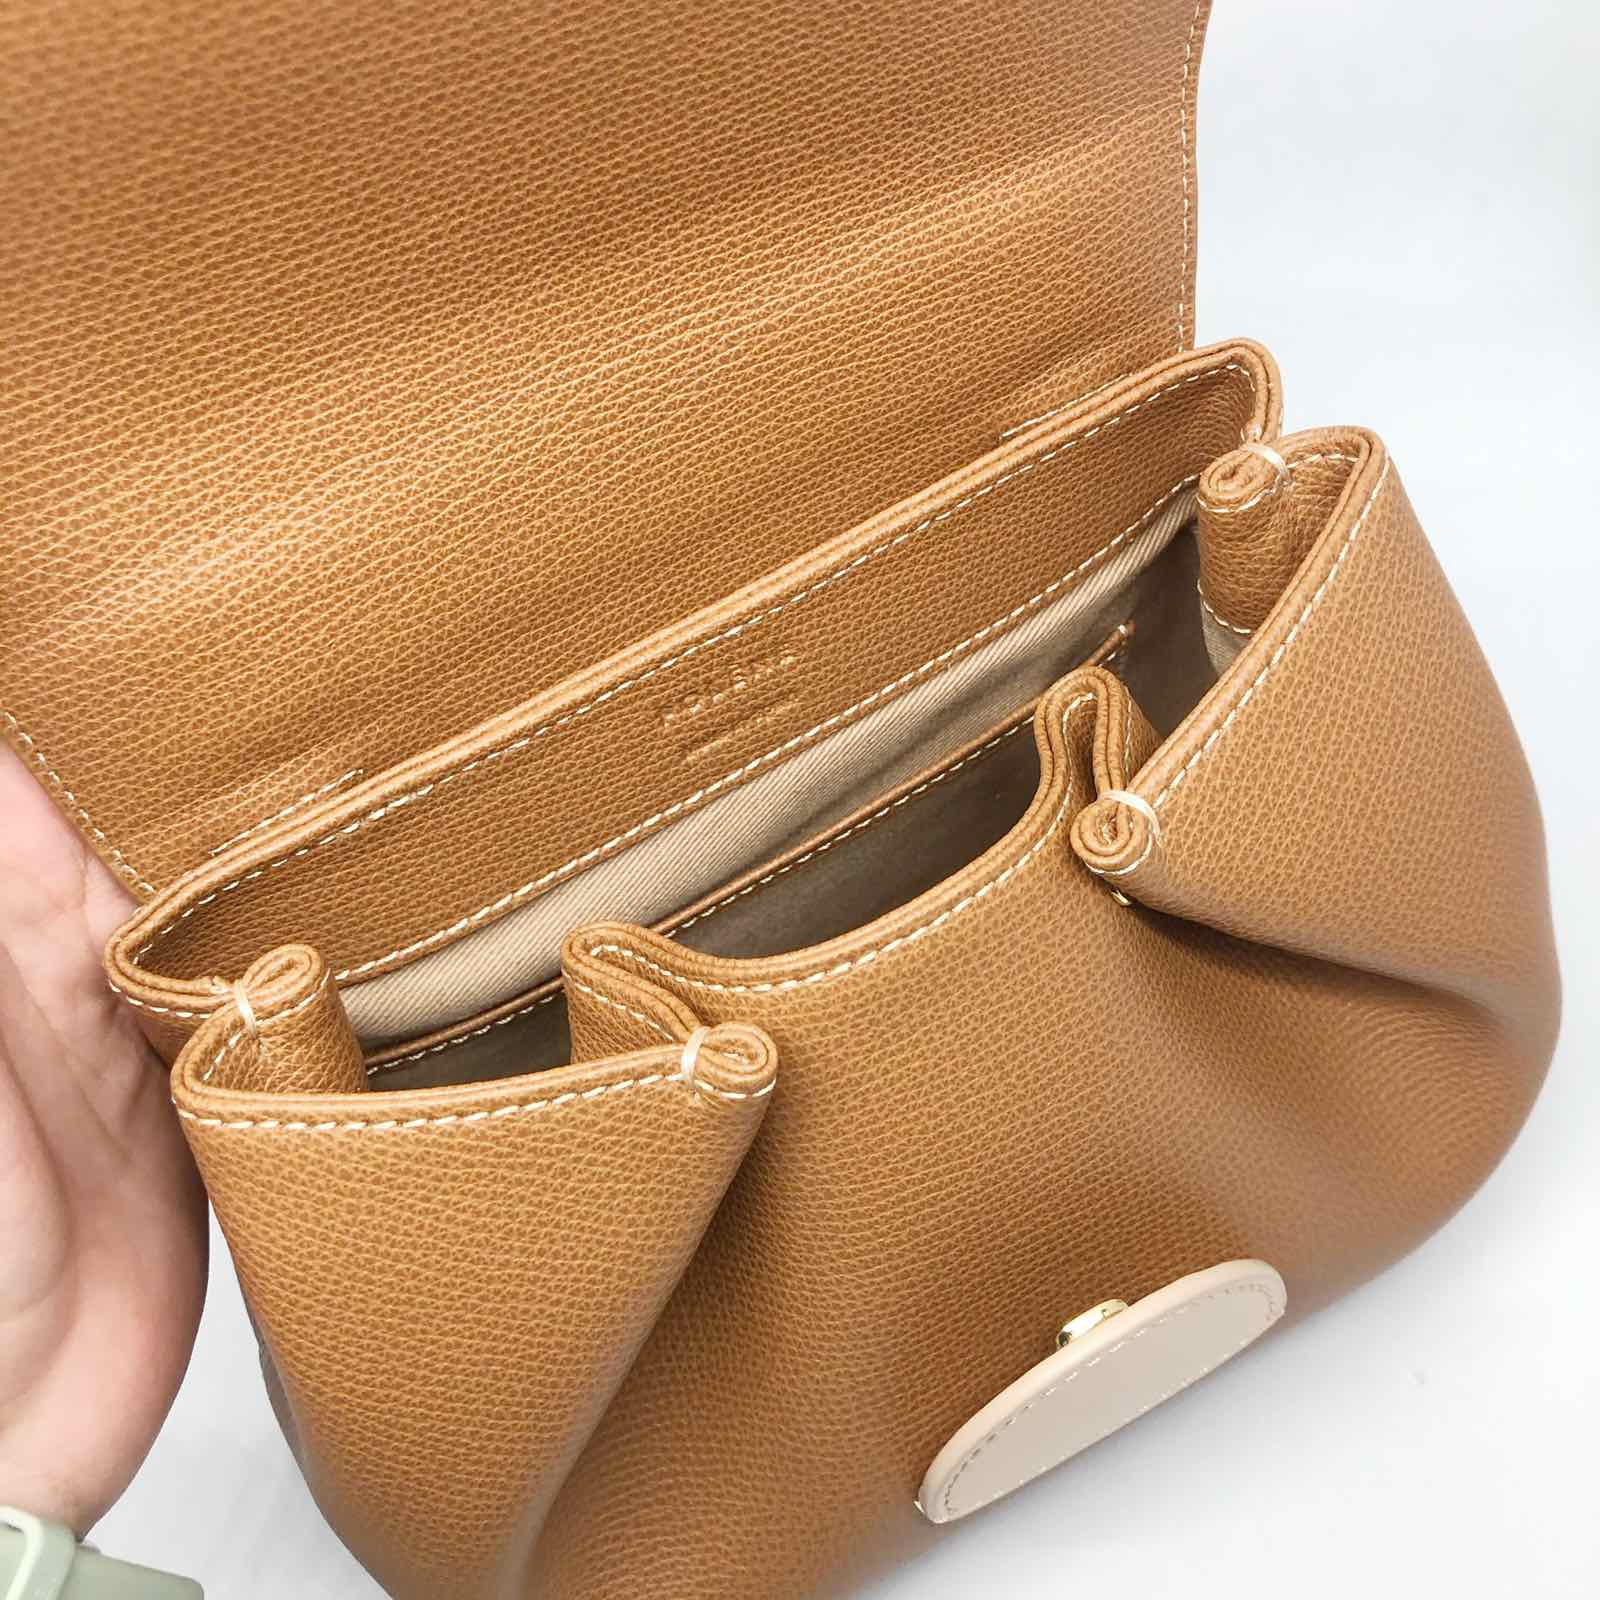 Unveiling My First Polene Numero Un Nano Bag in Camel Trio: Unboxing and  First Impressions! 